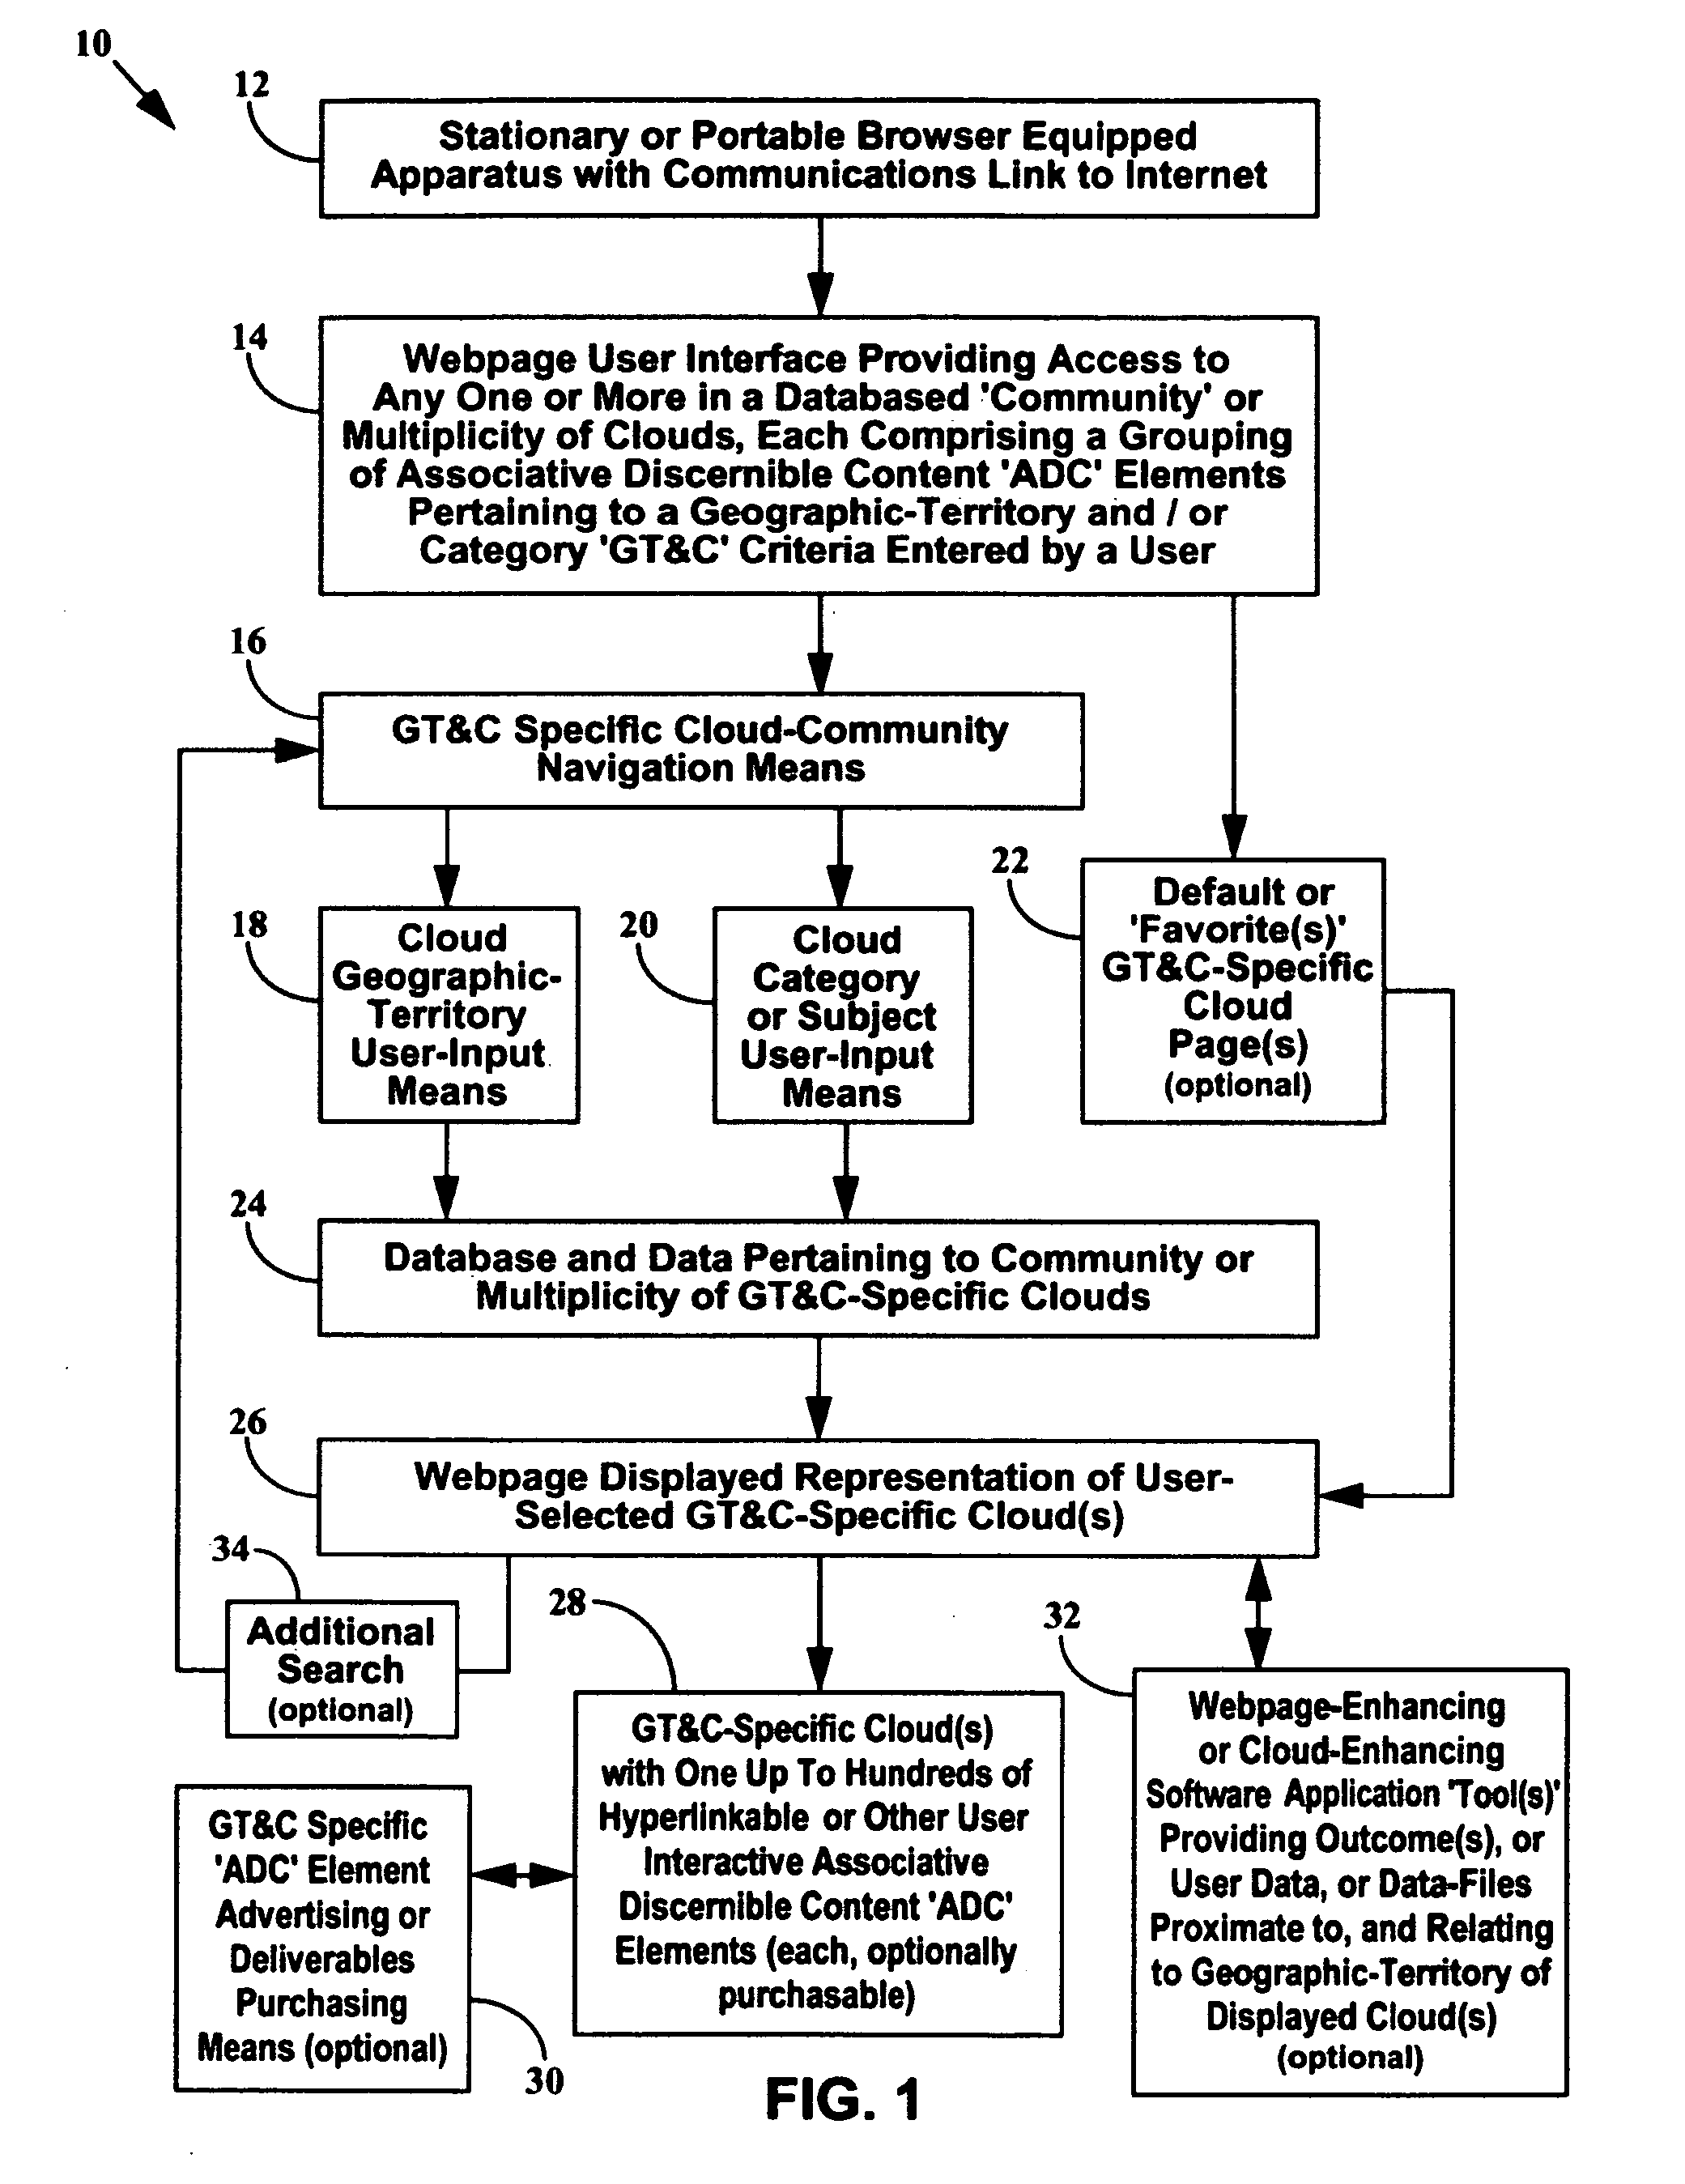 System and method for searching, advertising, producing and displaying geographic territory-specific content in inter-operable co-located user-interface components